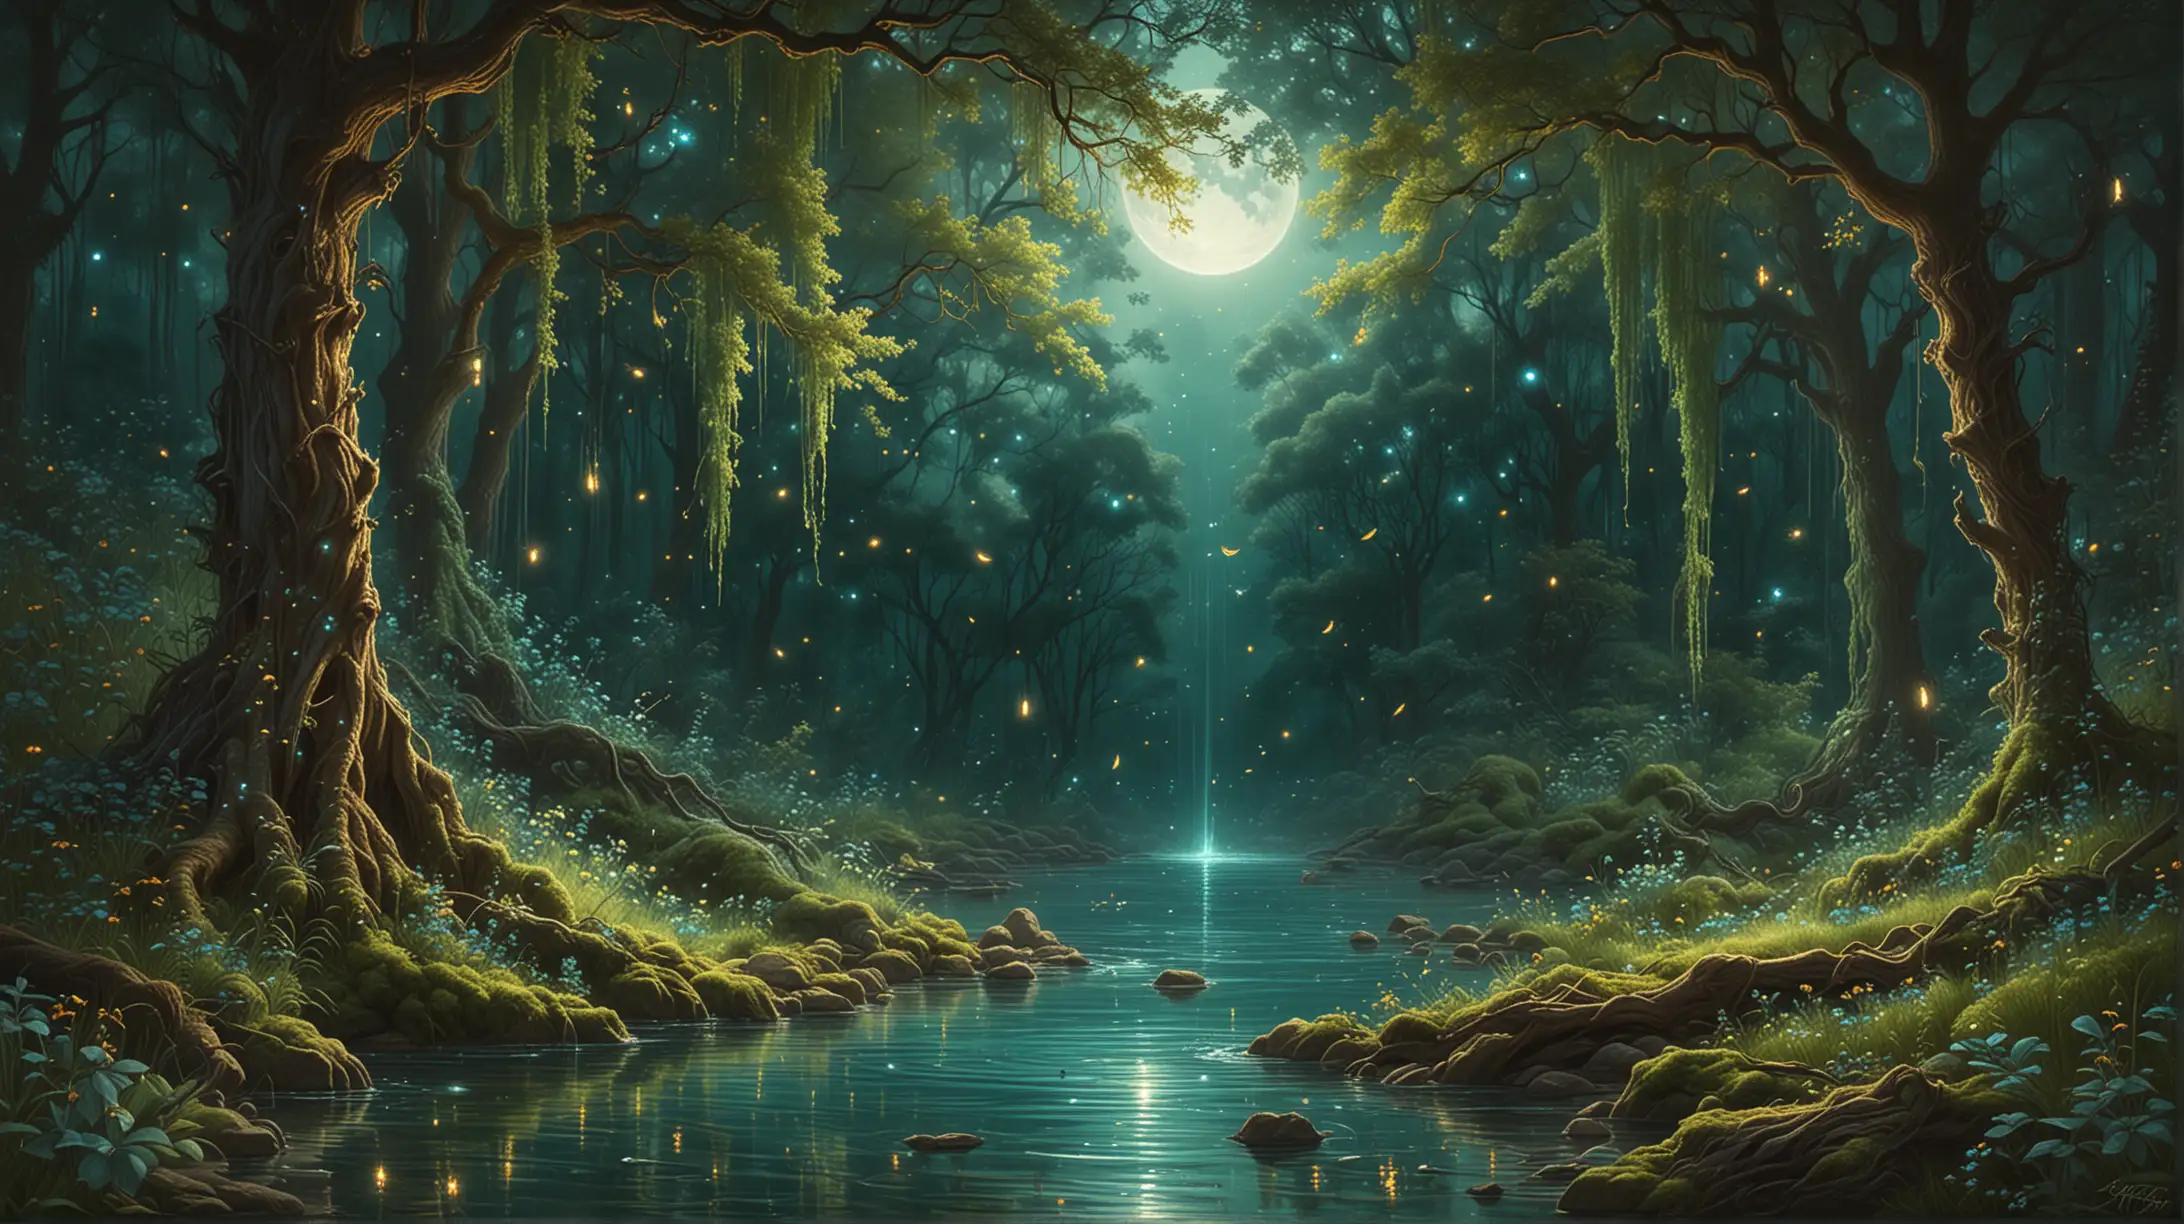 the fountain of youth, waterfall, shimmering pool of water hidden in a remote and mystical lush green forest with oak trees, ash dark turquoise background, moon, orions belt, stars, starfall, pastel colors, vintage, kerem beyit, by Daniel Merriam, esao andrews, ornate, by Kerembeyit, inspired by Daniel Merriam, by Jan Kip, fire flies, daniel merriam, highly detailed digital artwork, antique, vintage, dusty, and rugged illustration